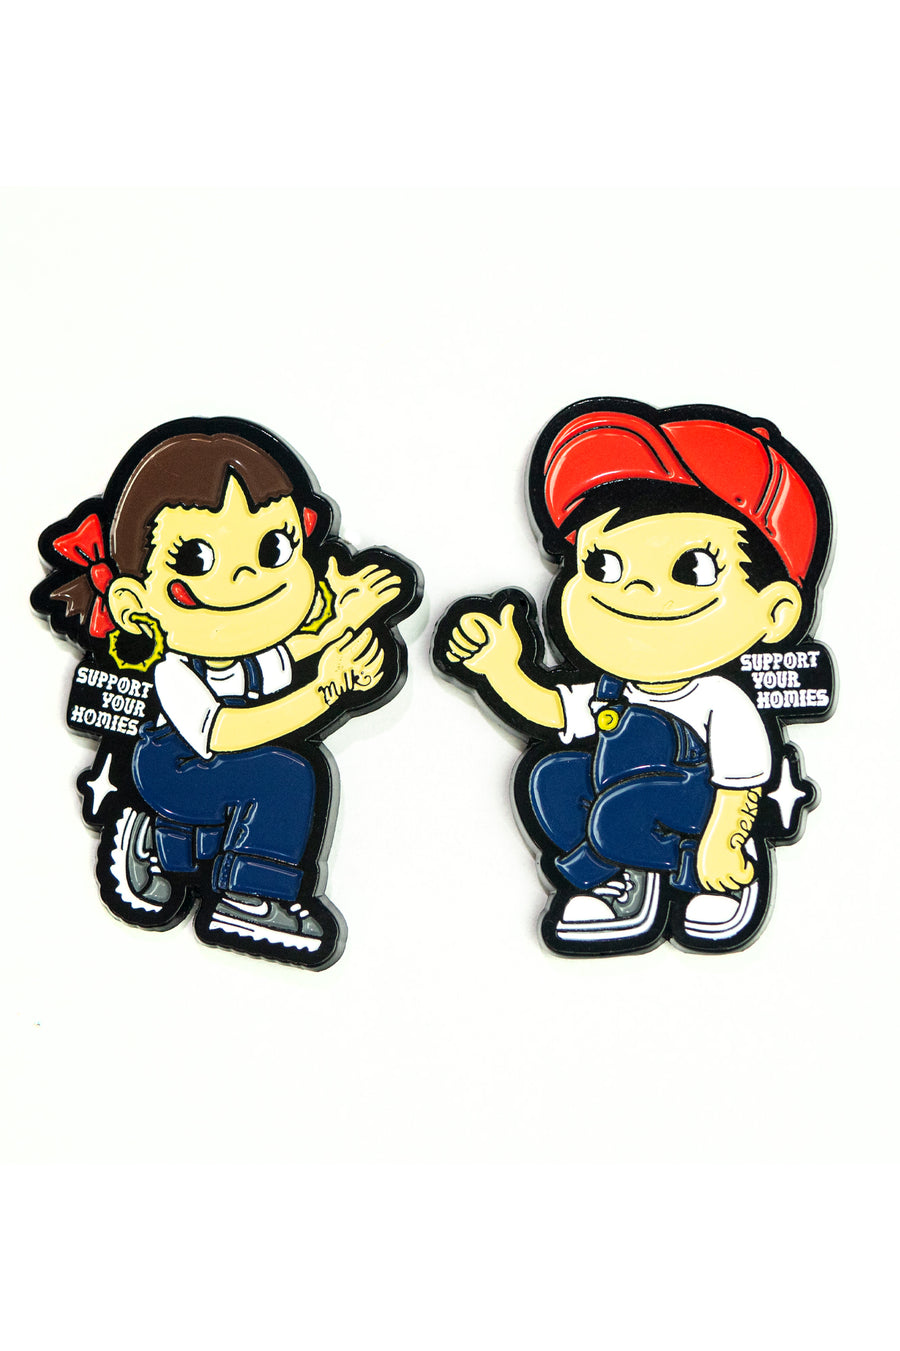 Support Your Homies Pin Set